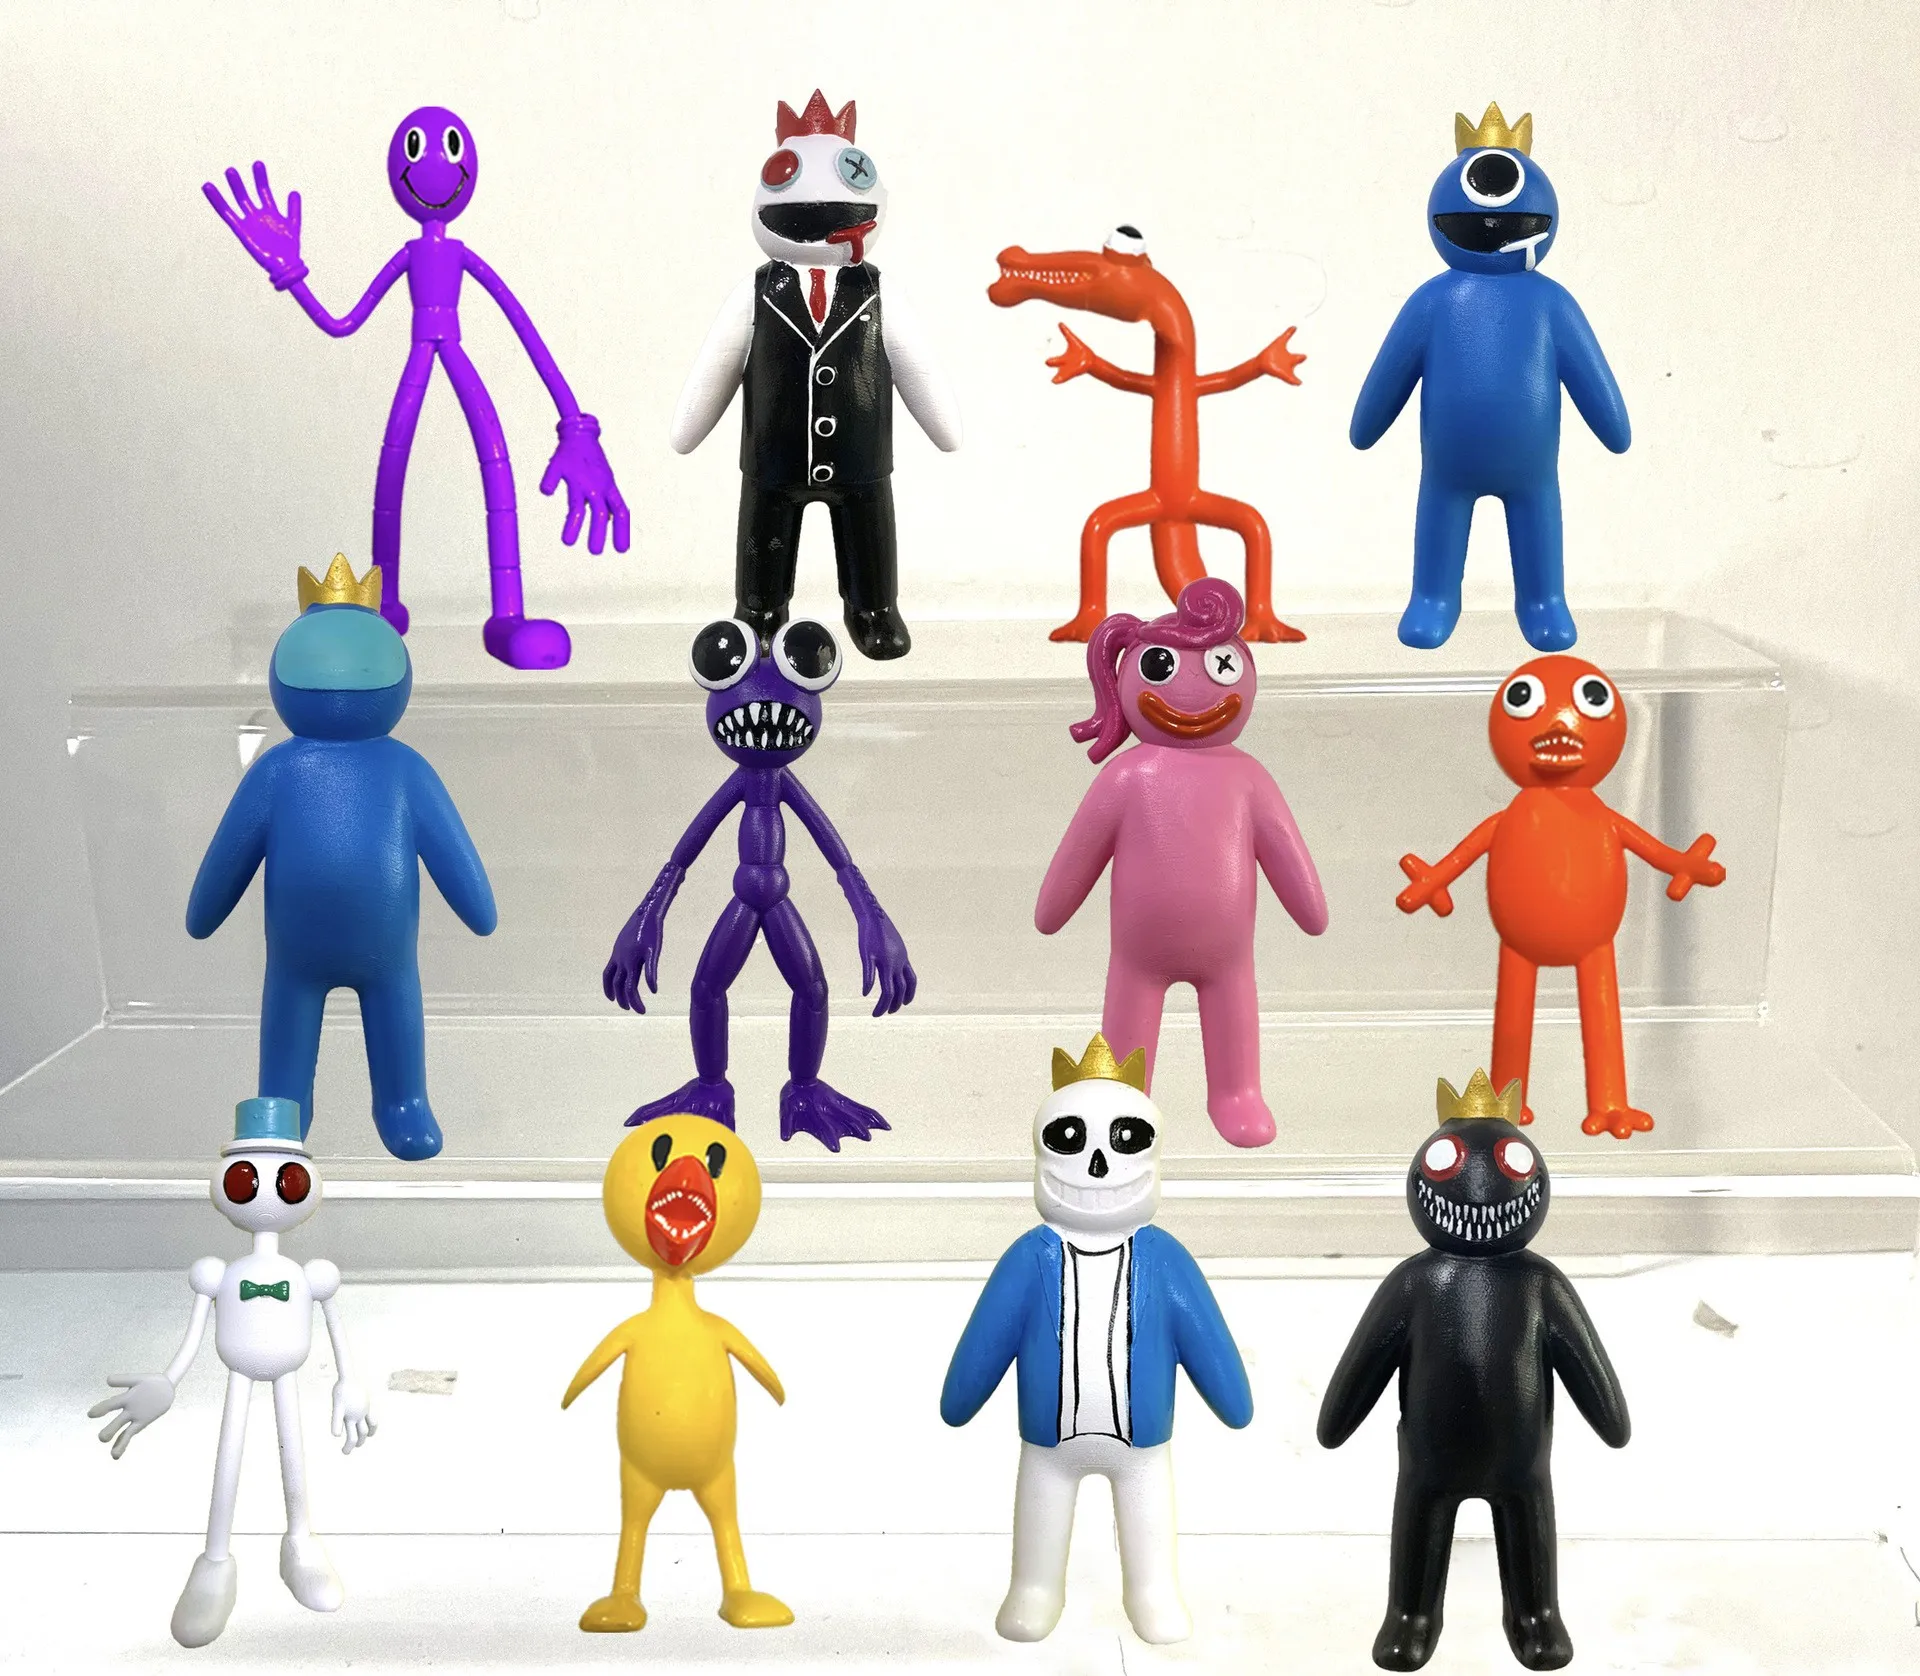 12 PC Rainbow Friends Game Action Figure Toy Collection Model